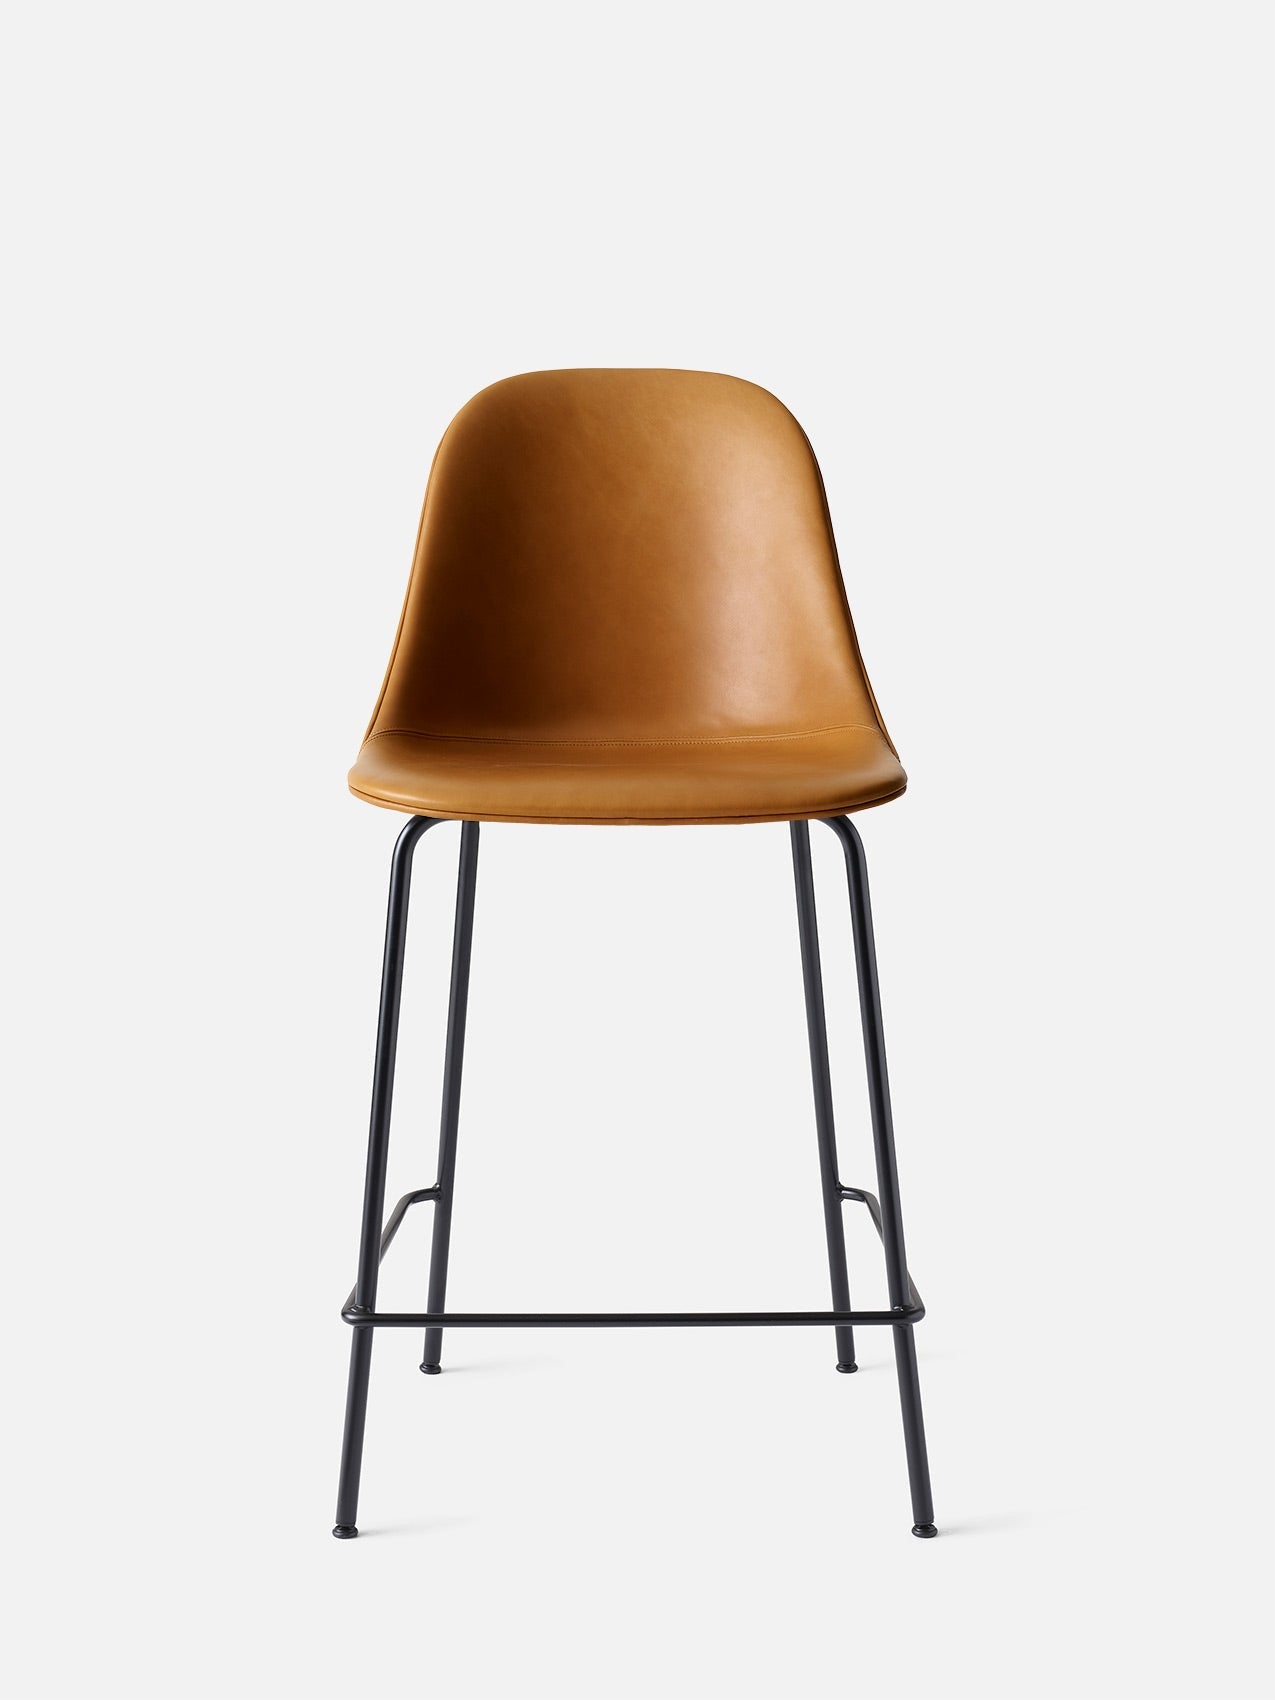 Harbour Side Chair, Upholstered-Chair-Norm Architects-Counter Height (Seat 24.8in H)/Black Steel-0250 Cognac/Dakar-menu-minimalist-modern-danish-design-home-decor